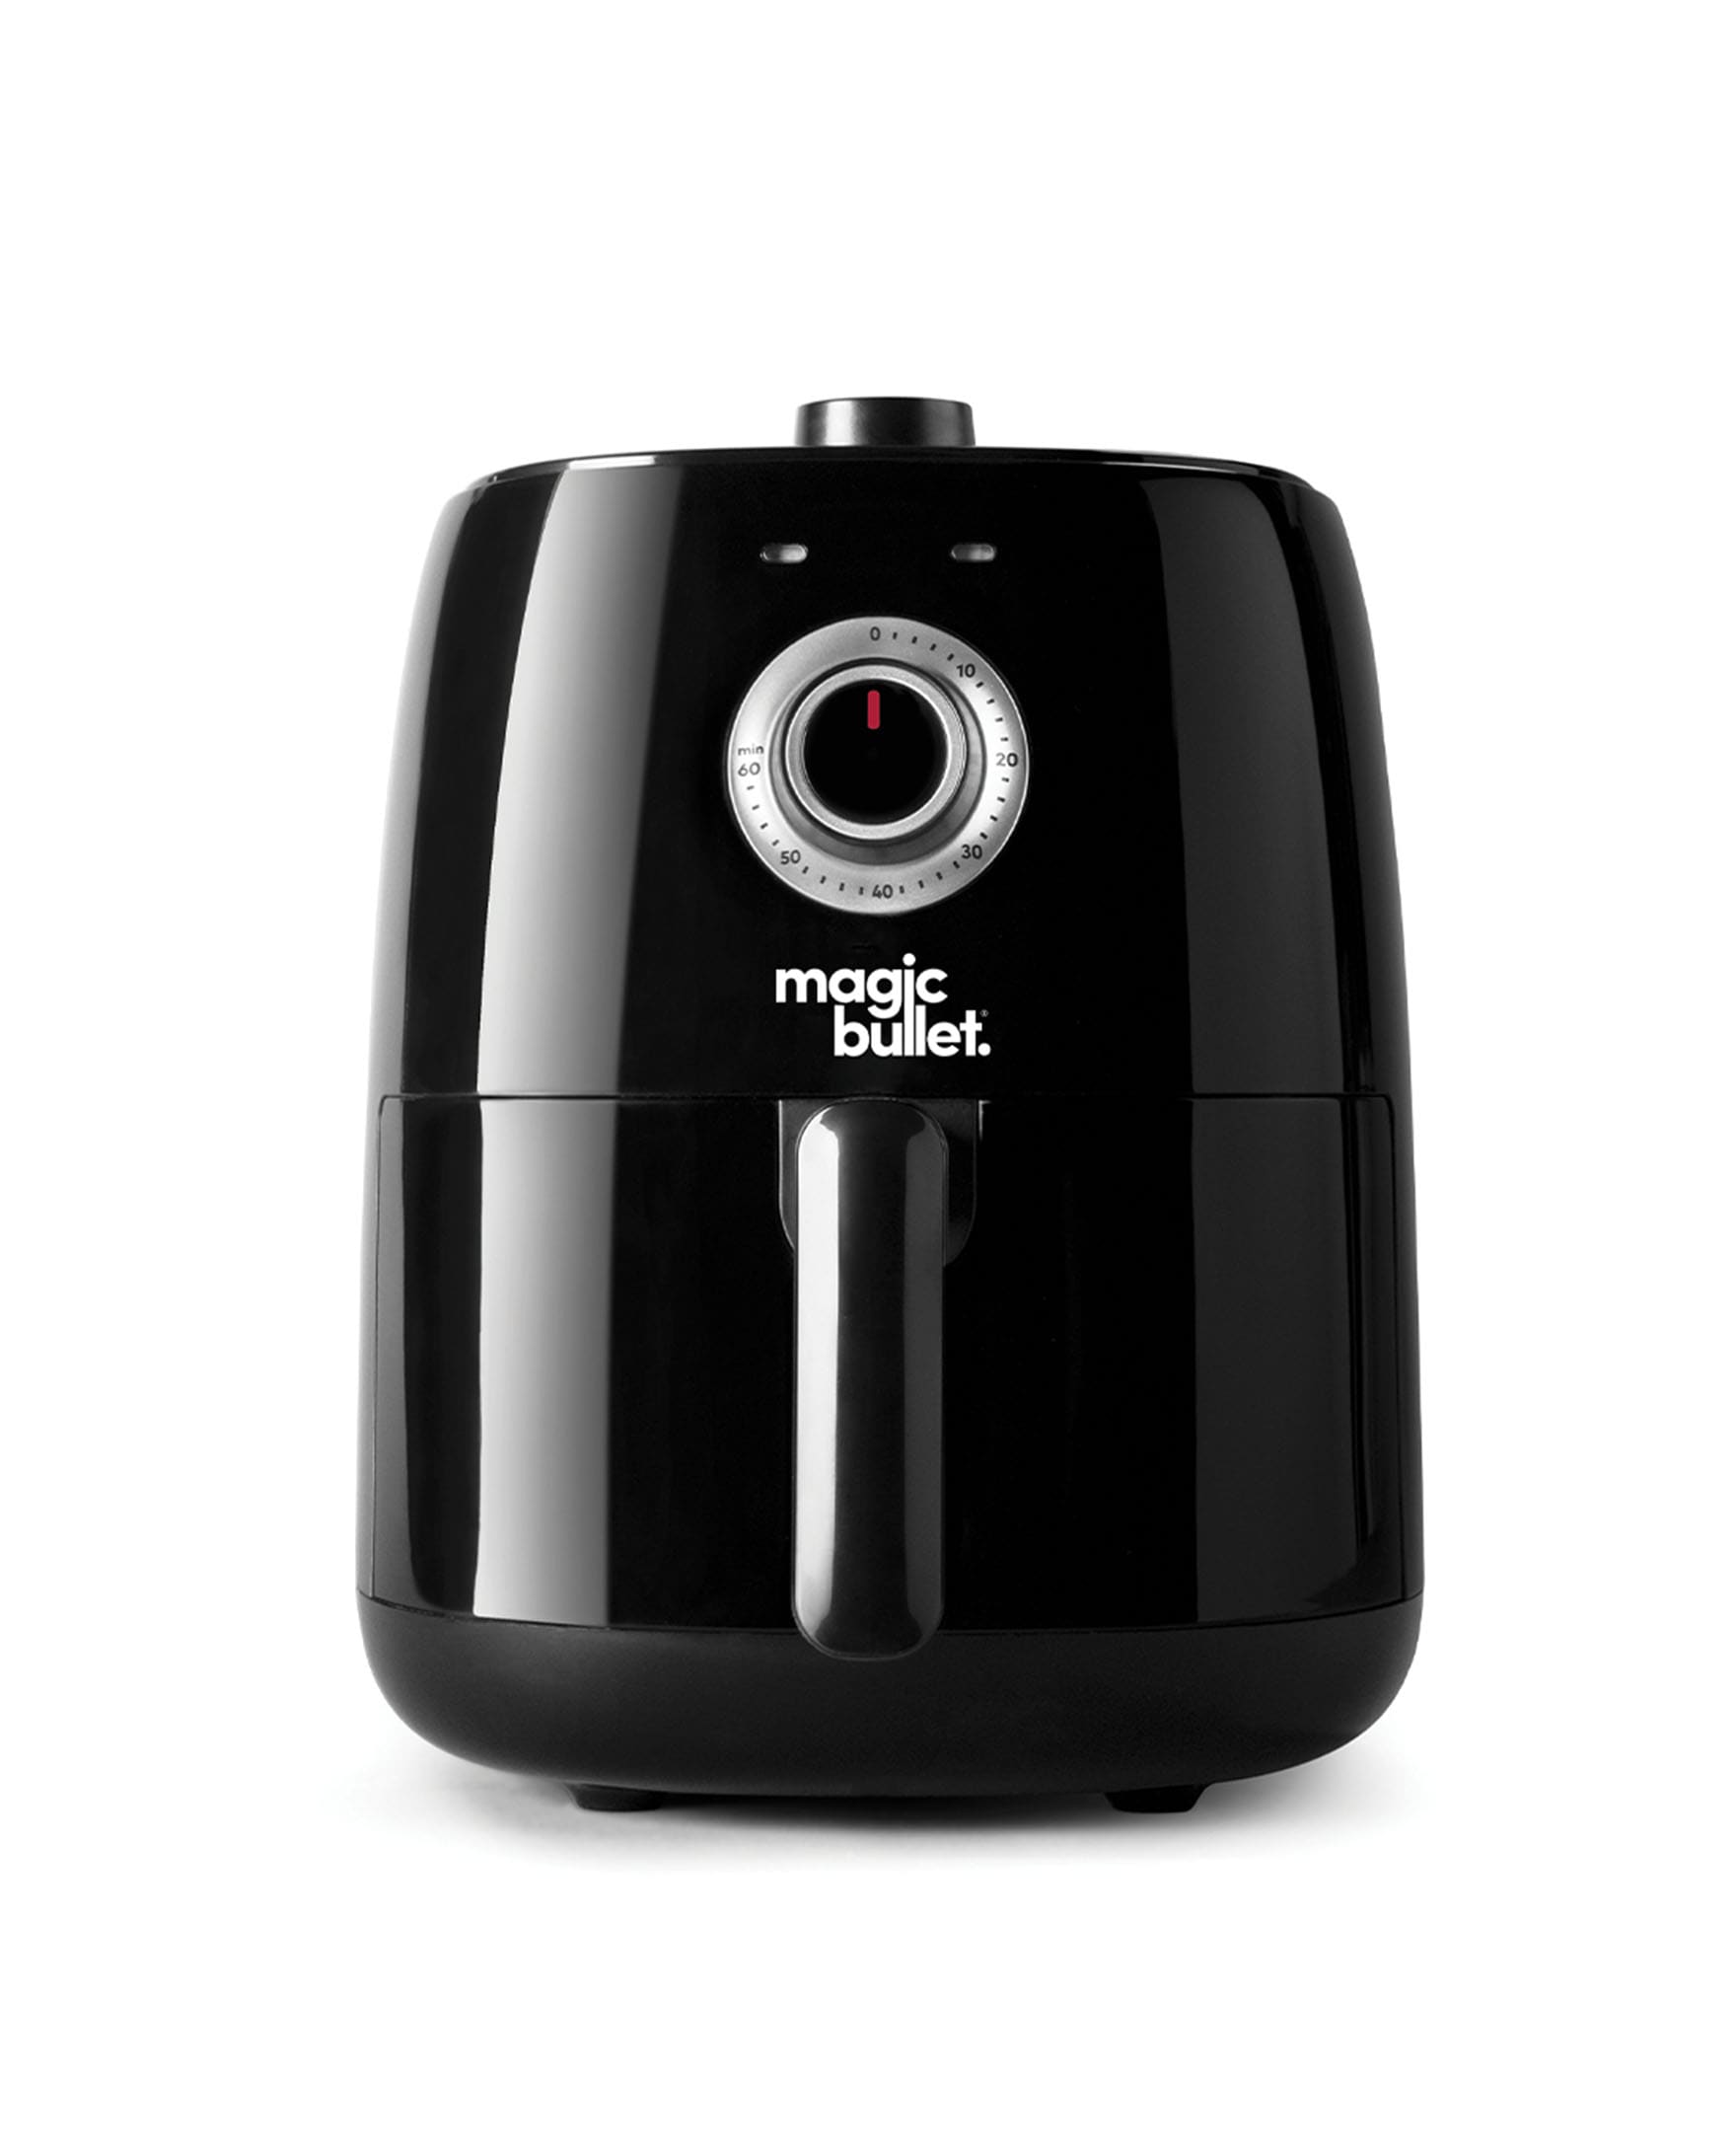 magic bullet Black 2.5-qt Air Fryer with Removable Fry Basket and Heating  Element, 1300W, 60-Minute Timer, UL Listed in the Air Fryers department at